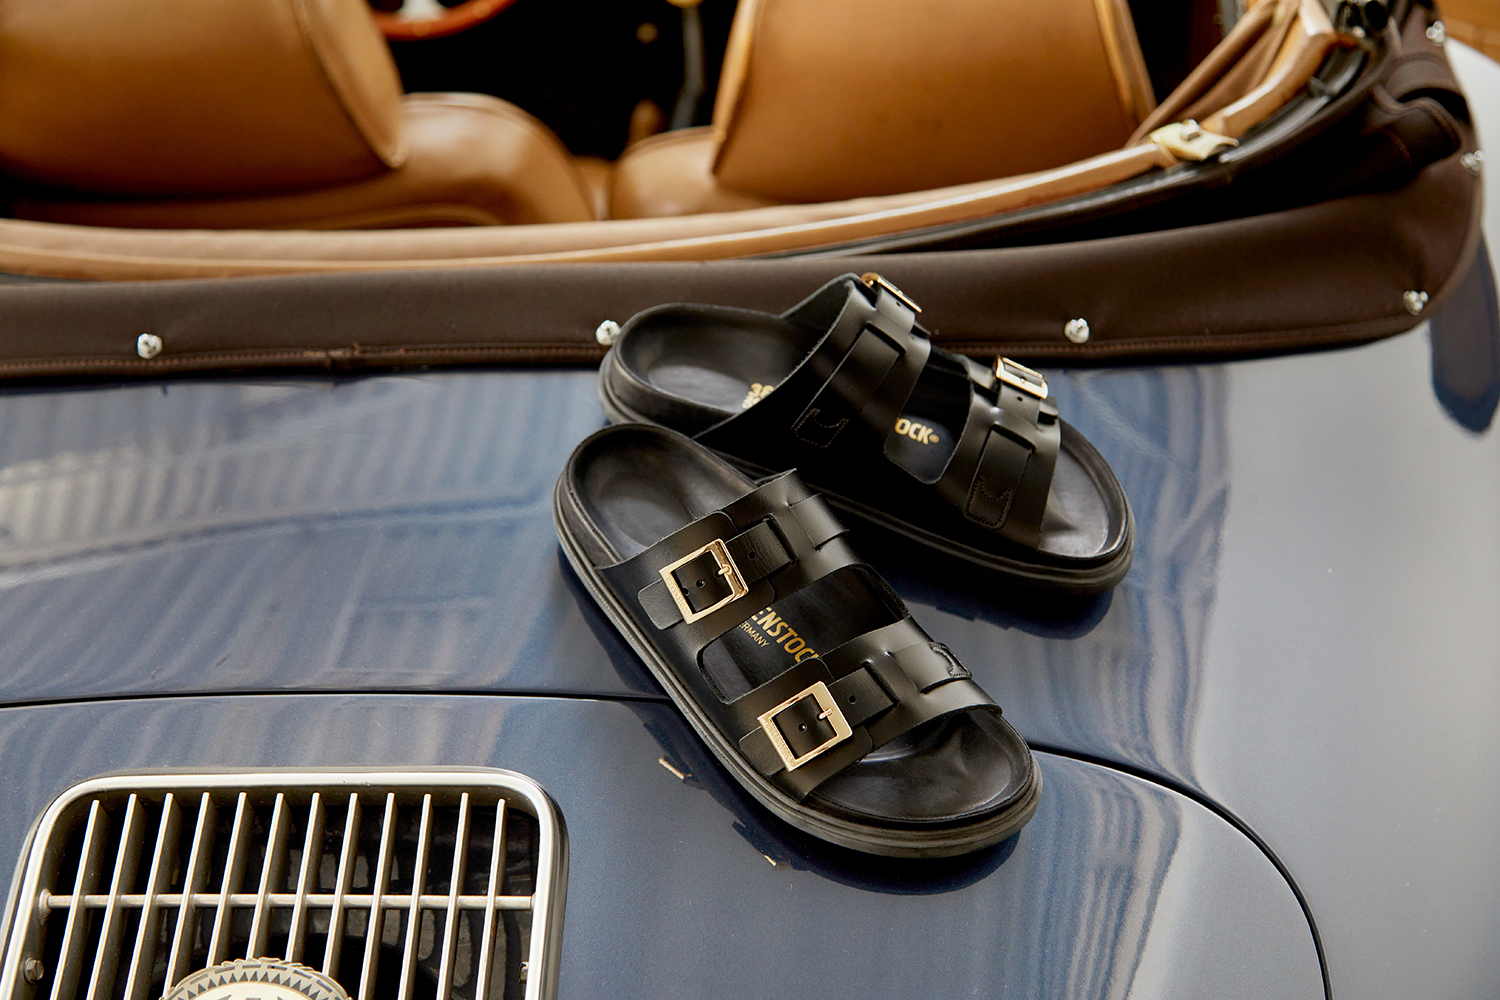 Birkenstock's St. Barths sandal in a black leather color with two straps, silver buckles, and a black footbed